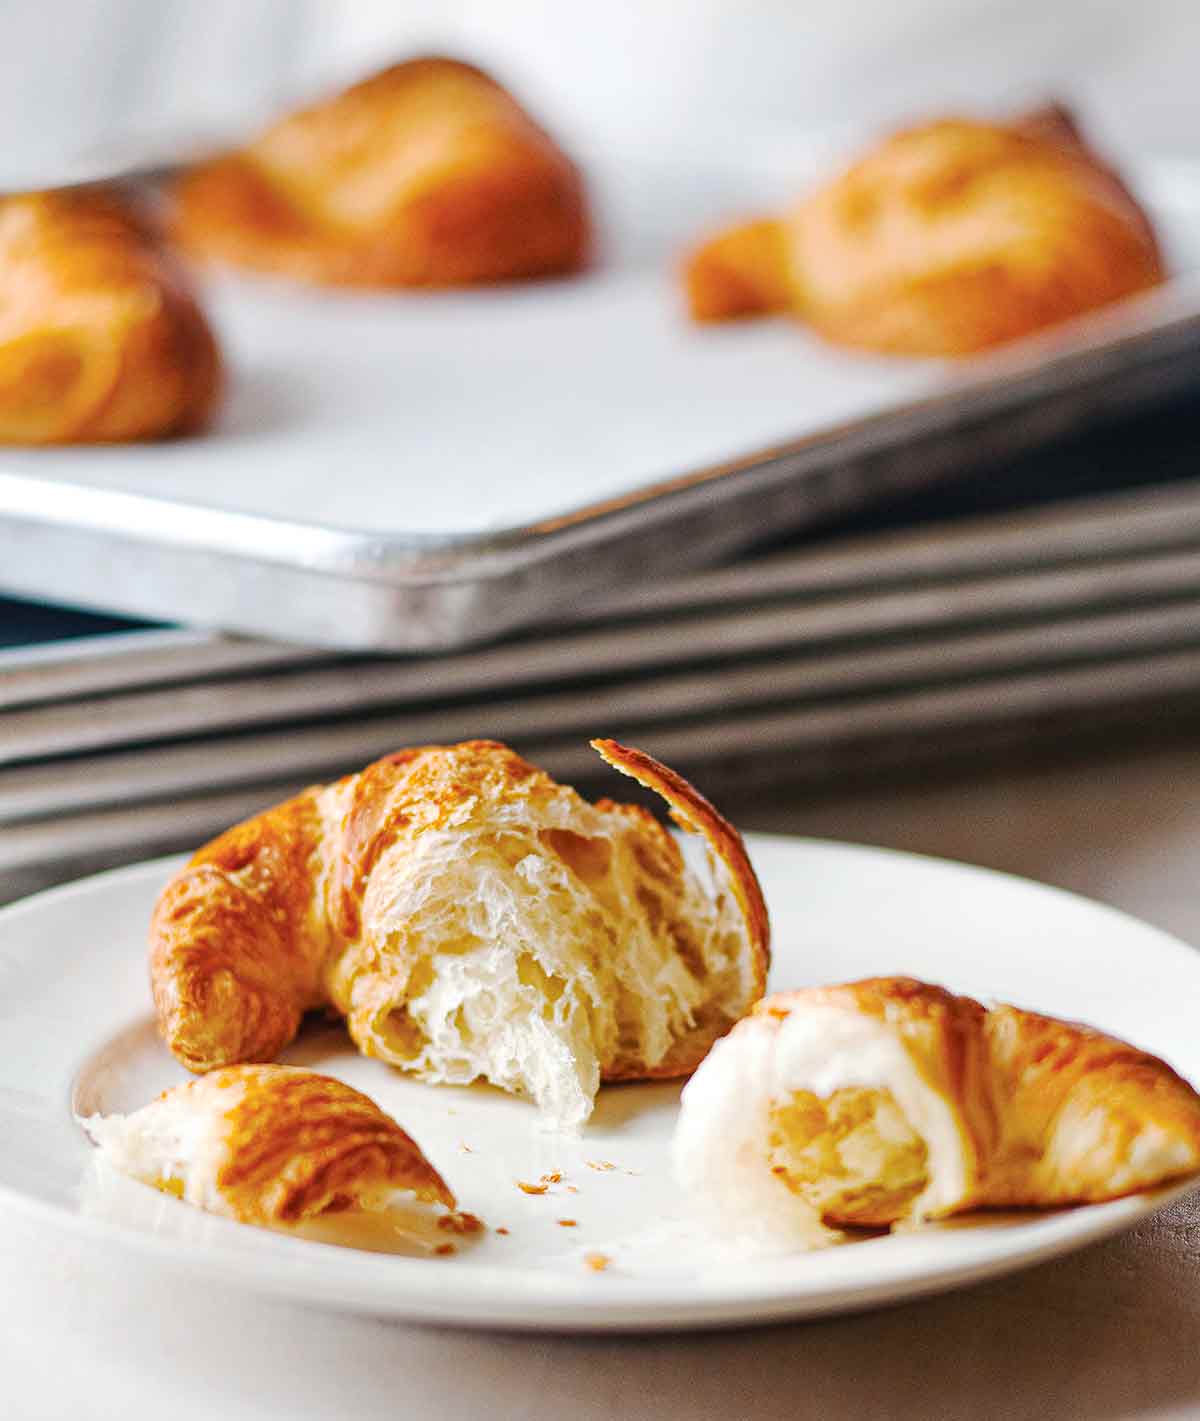 A torn croissant on a plate with more croissants on a rimmed baking sheet in the background.